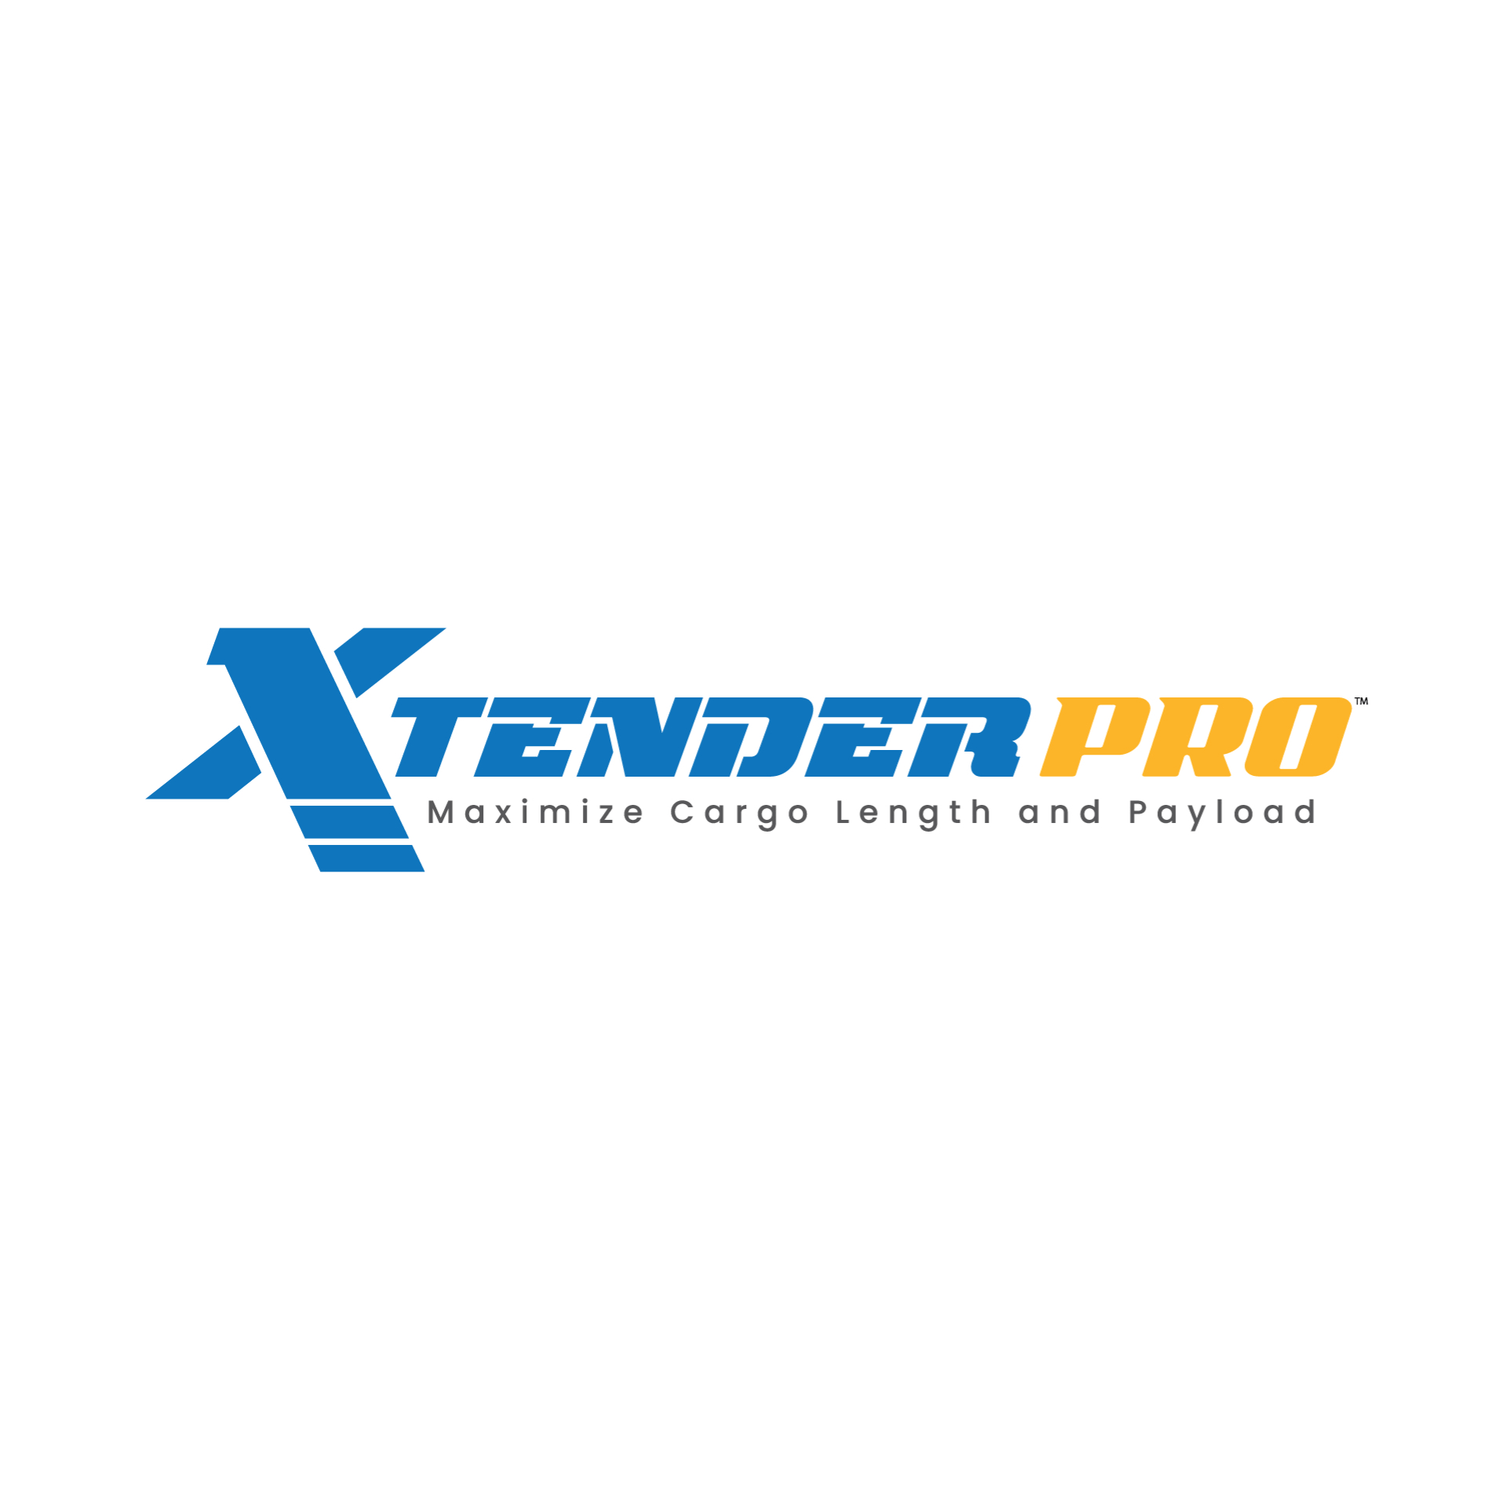 Xtender Pro™ - Paragon Pro Manufacturing Solutions Inc.